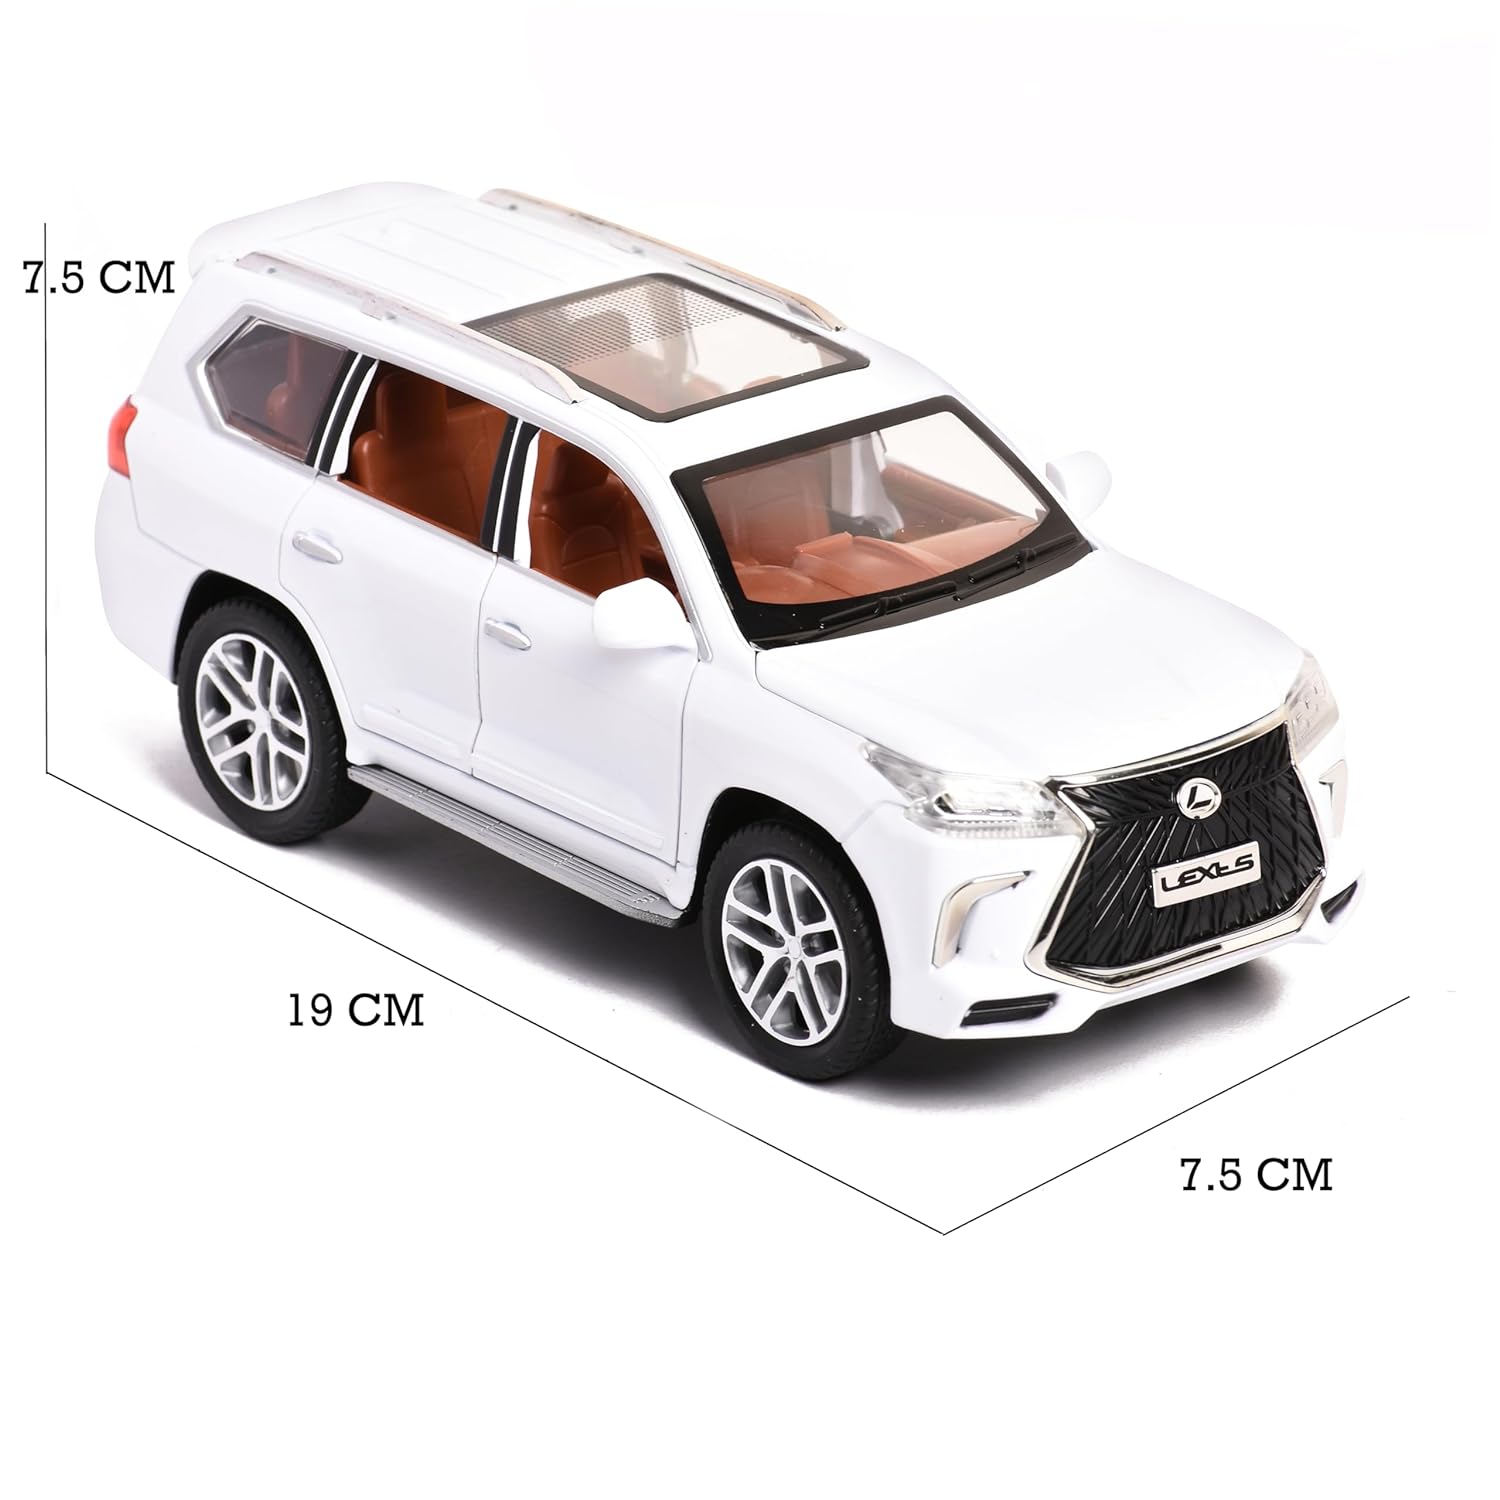 Braintastic Model Diecast Car Toy Vehicle Pull Back Friction Car with Openable Doors Light & Music Toys for Kids Age 3+ Years (Lexus White)